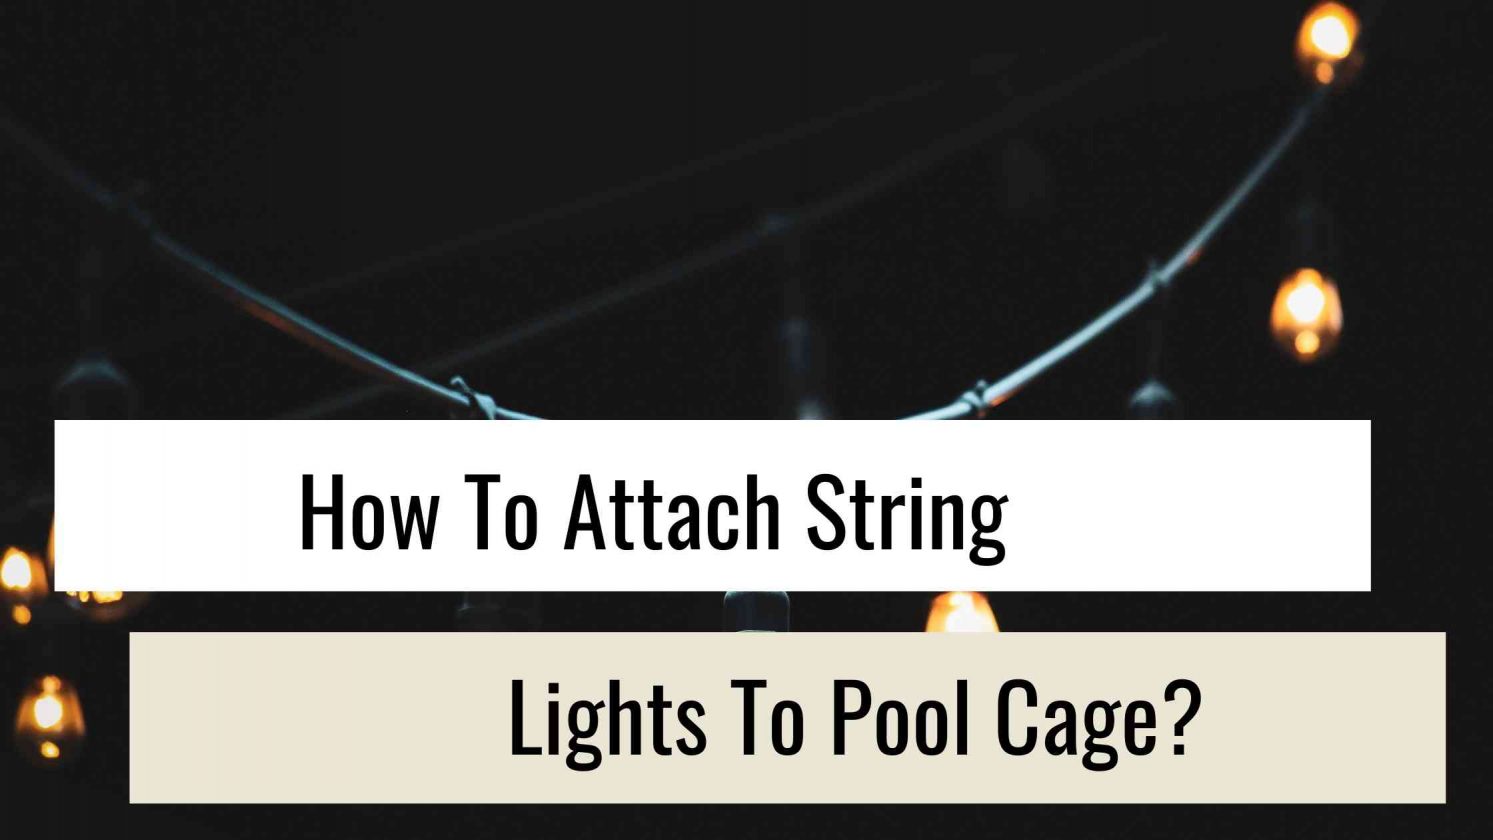 How To Attach String Lights To Pool Cage?